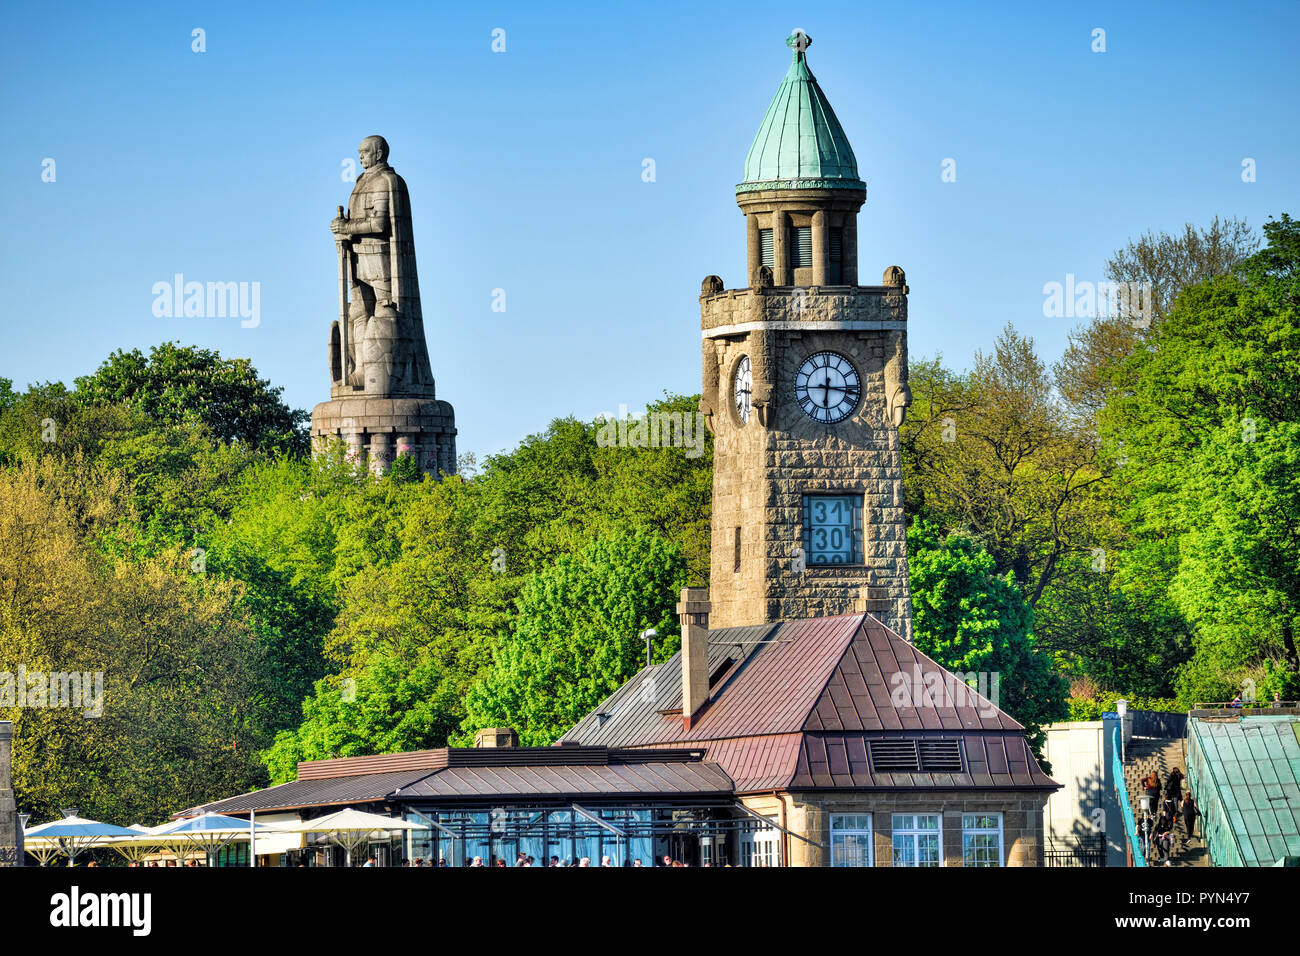 Glasenturm the Saint Pauli landing stages and Bismarck's monument in Hamburg, Germany, Europe, Glasenturm der St. Pauli Landungsbrücken und Bismarck-D Stock Photo